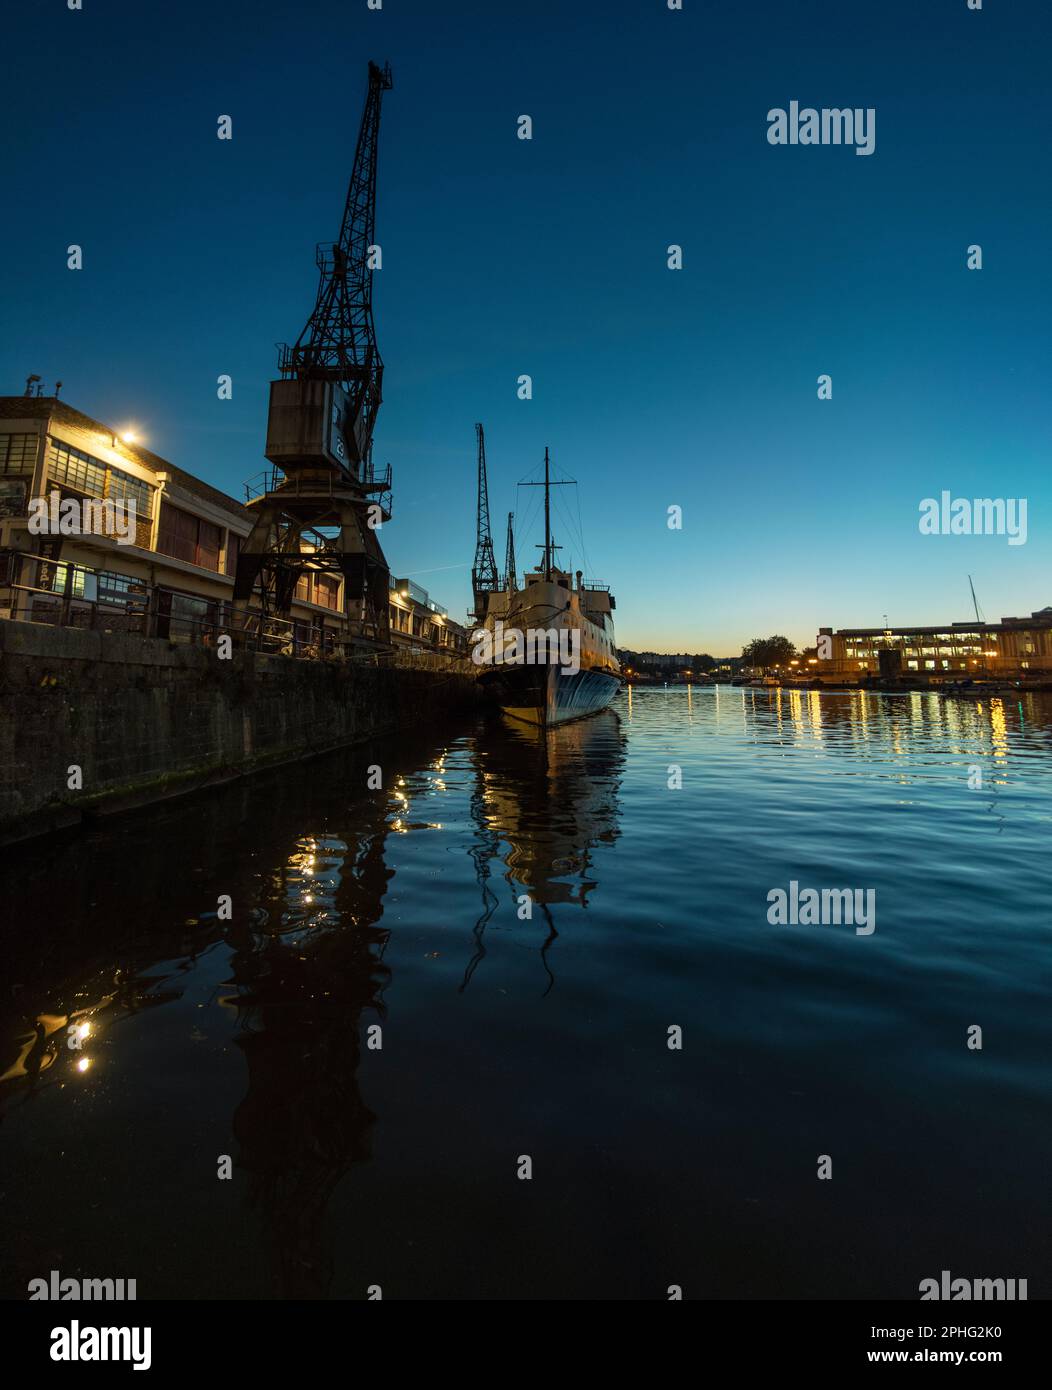 The MV Balmoral ship on Princes Wharf in Bristol a little after sunset, with the lights of the dock and city reflected in the water. Stock Photo